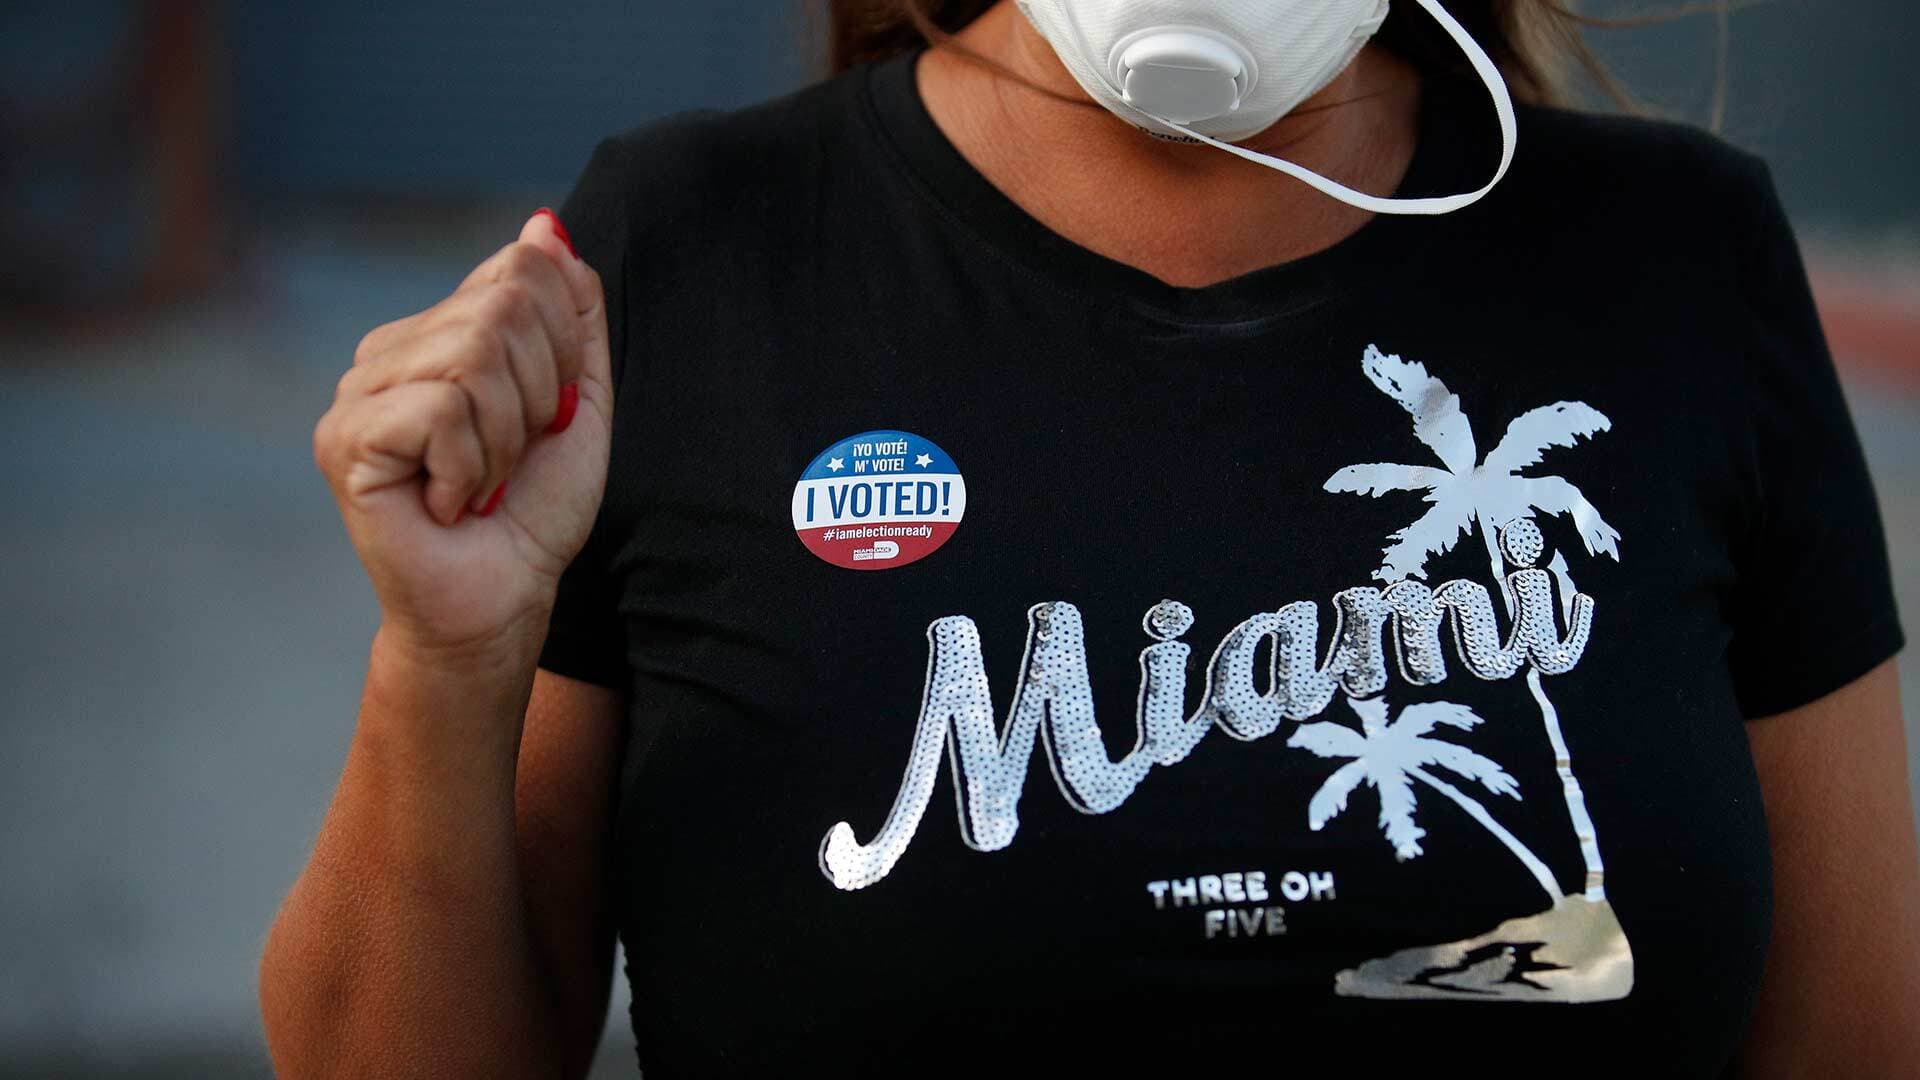 Person wearing Miami T-shirt and "I voted" sticker